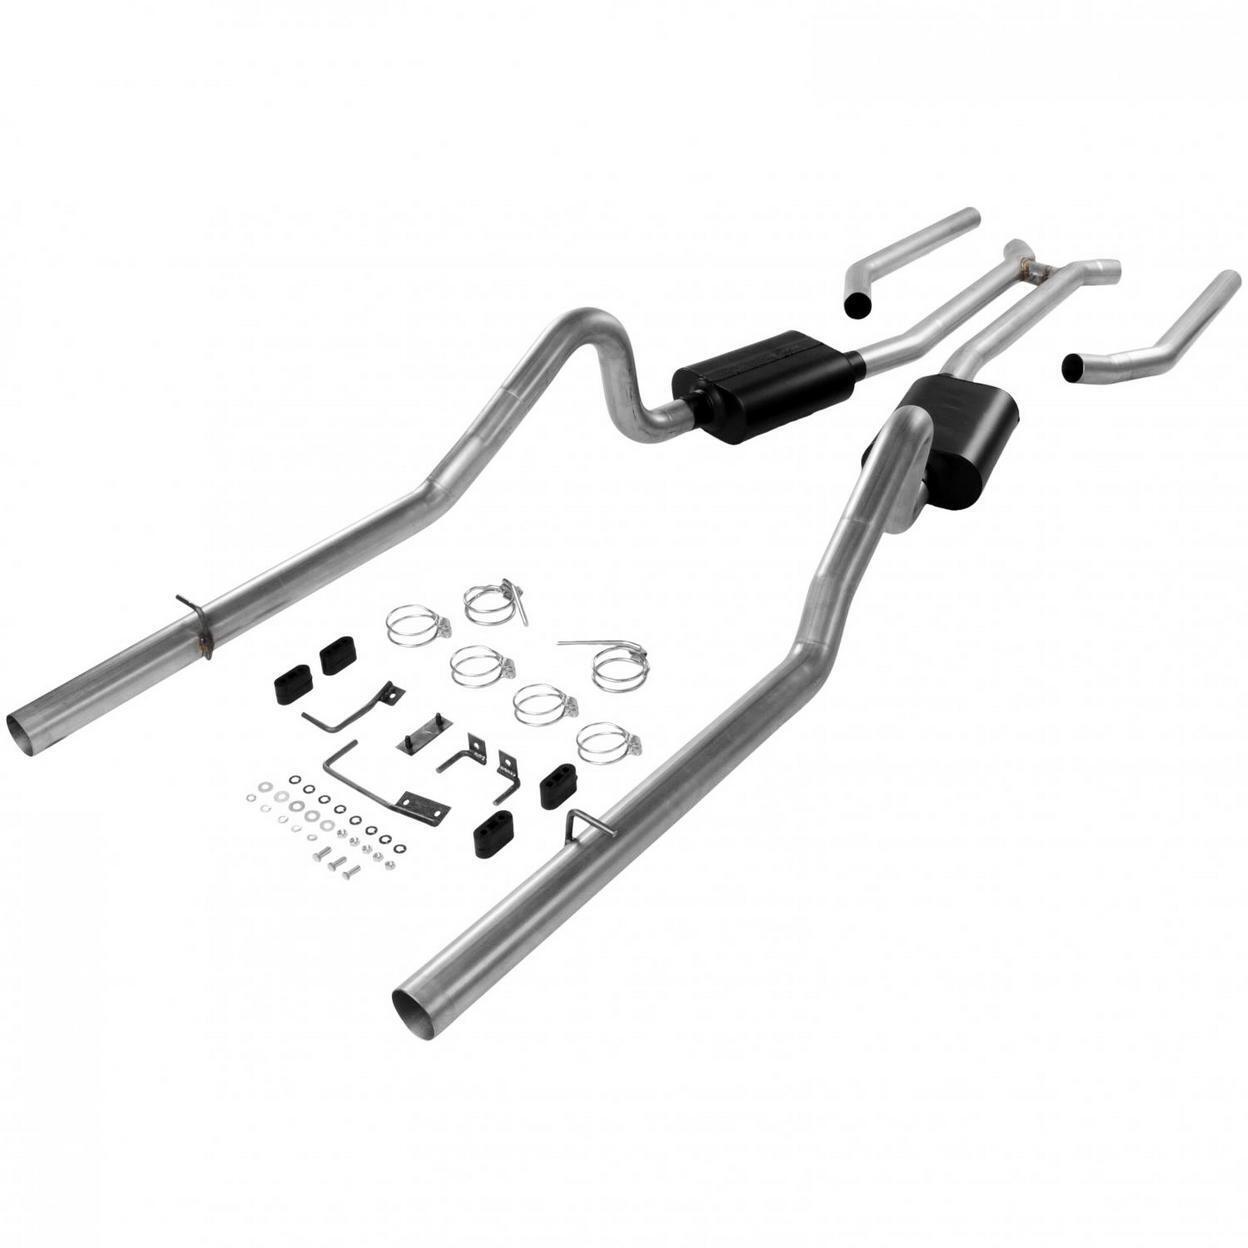 Exhaust System Kit for 1968-1970 Plymouth Belvedere